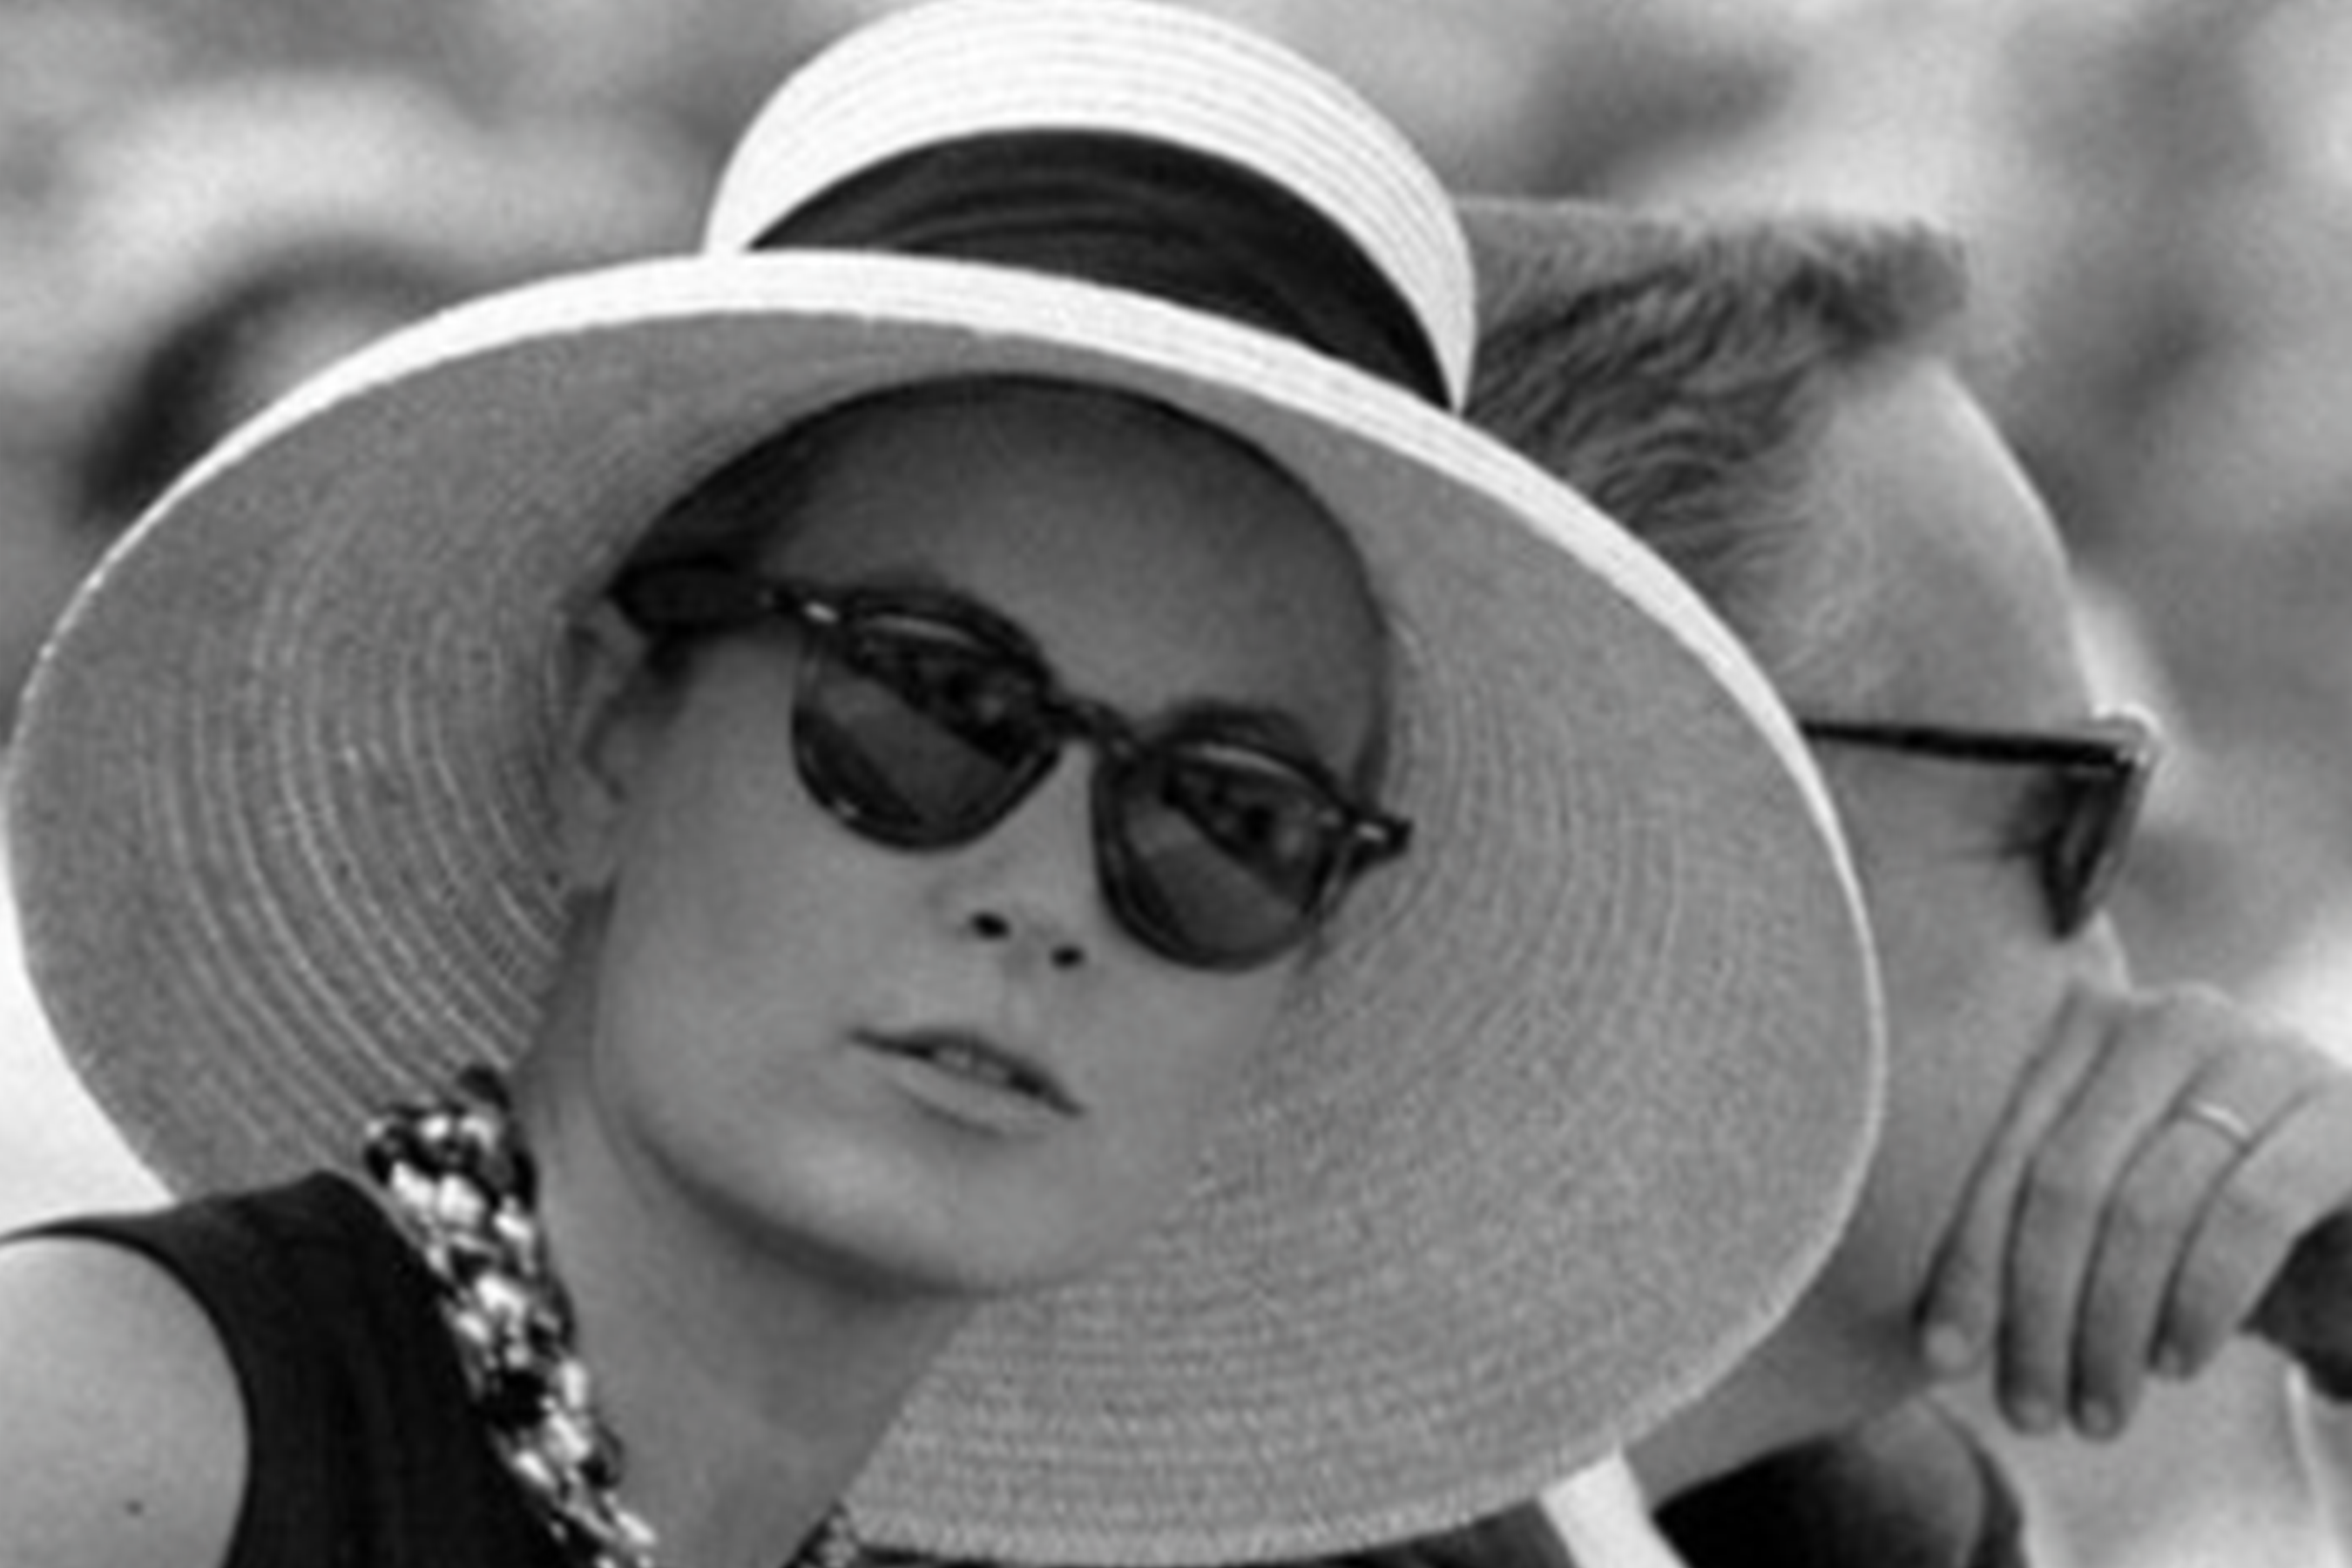 Grace Kelly wearing P3 style sunglasses and an oversized sun hat